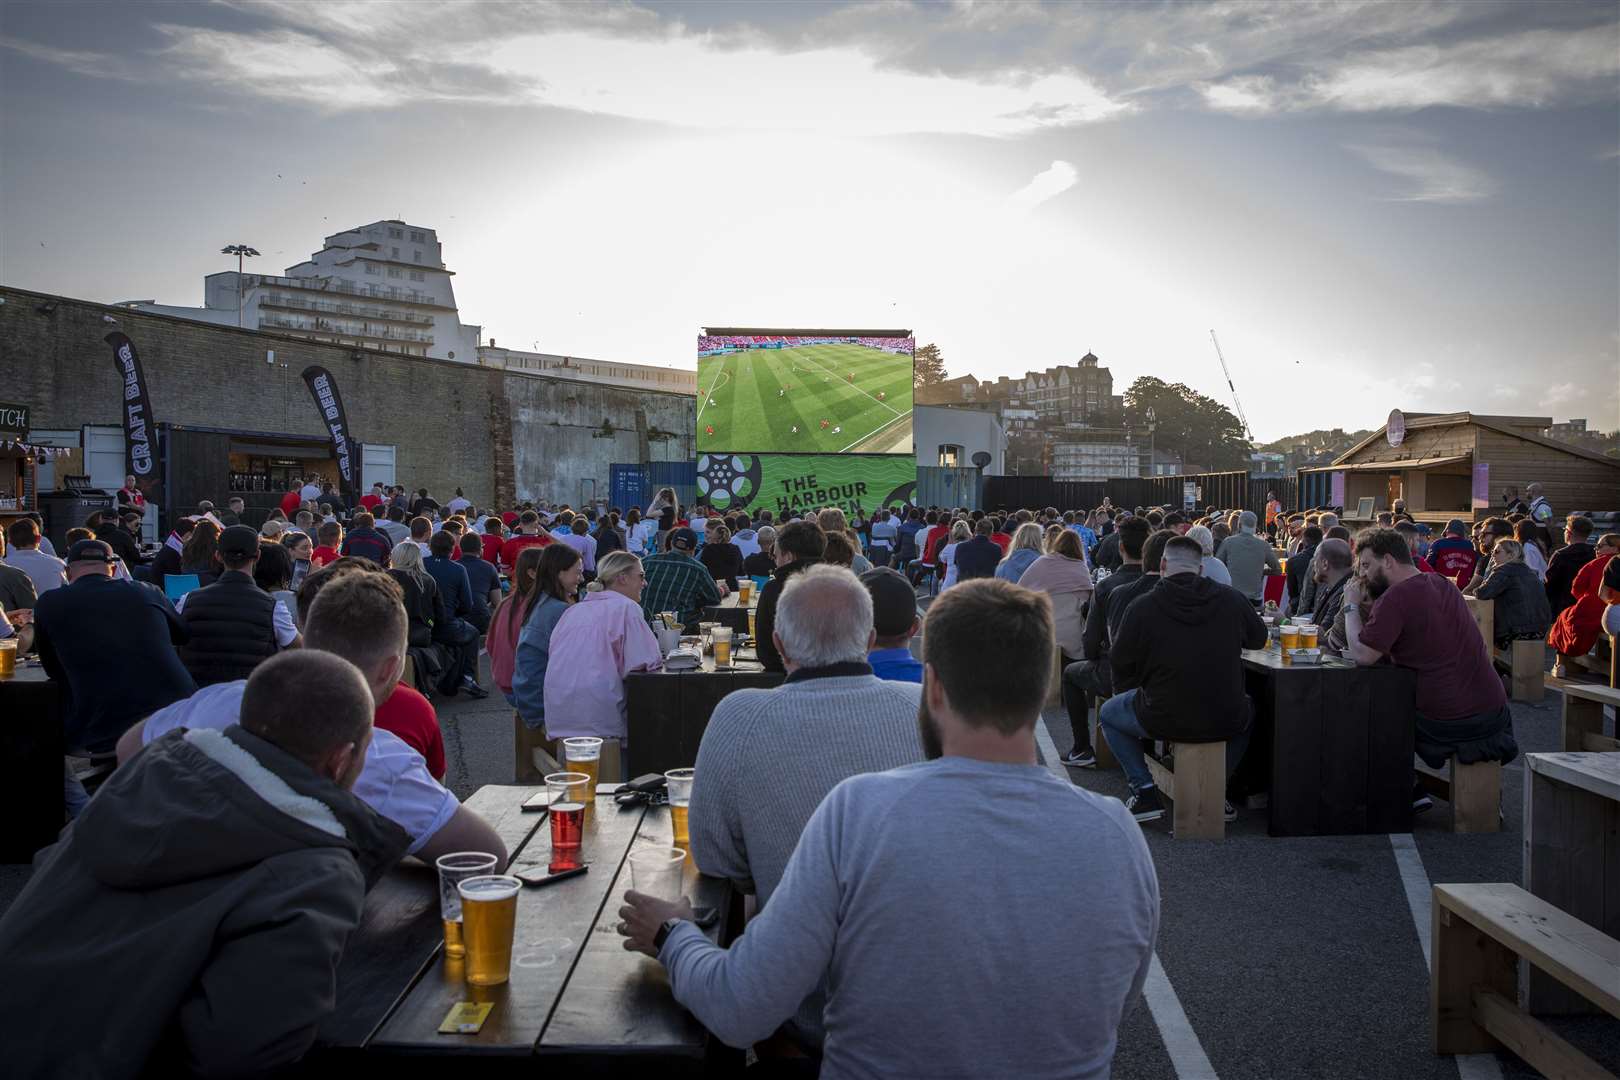 It has an outdoor screen, as well as many food and drink vendors. Picture: Andy Aitchison